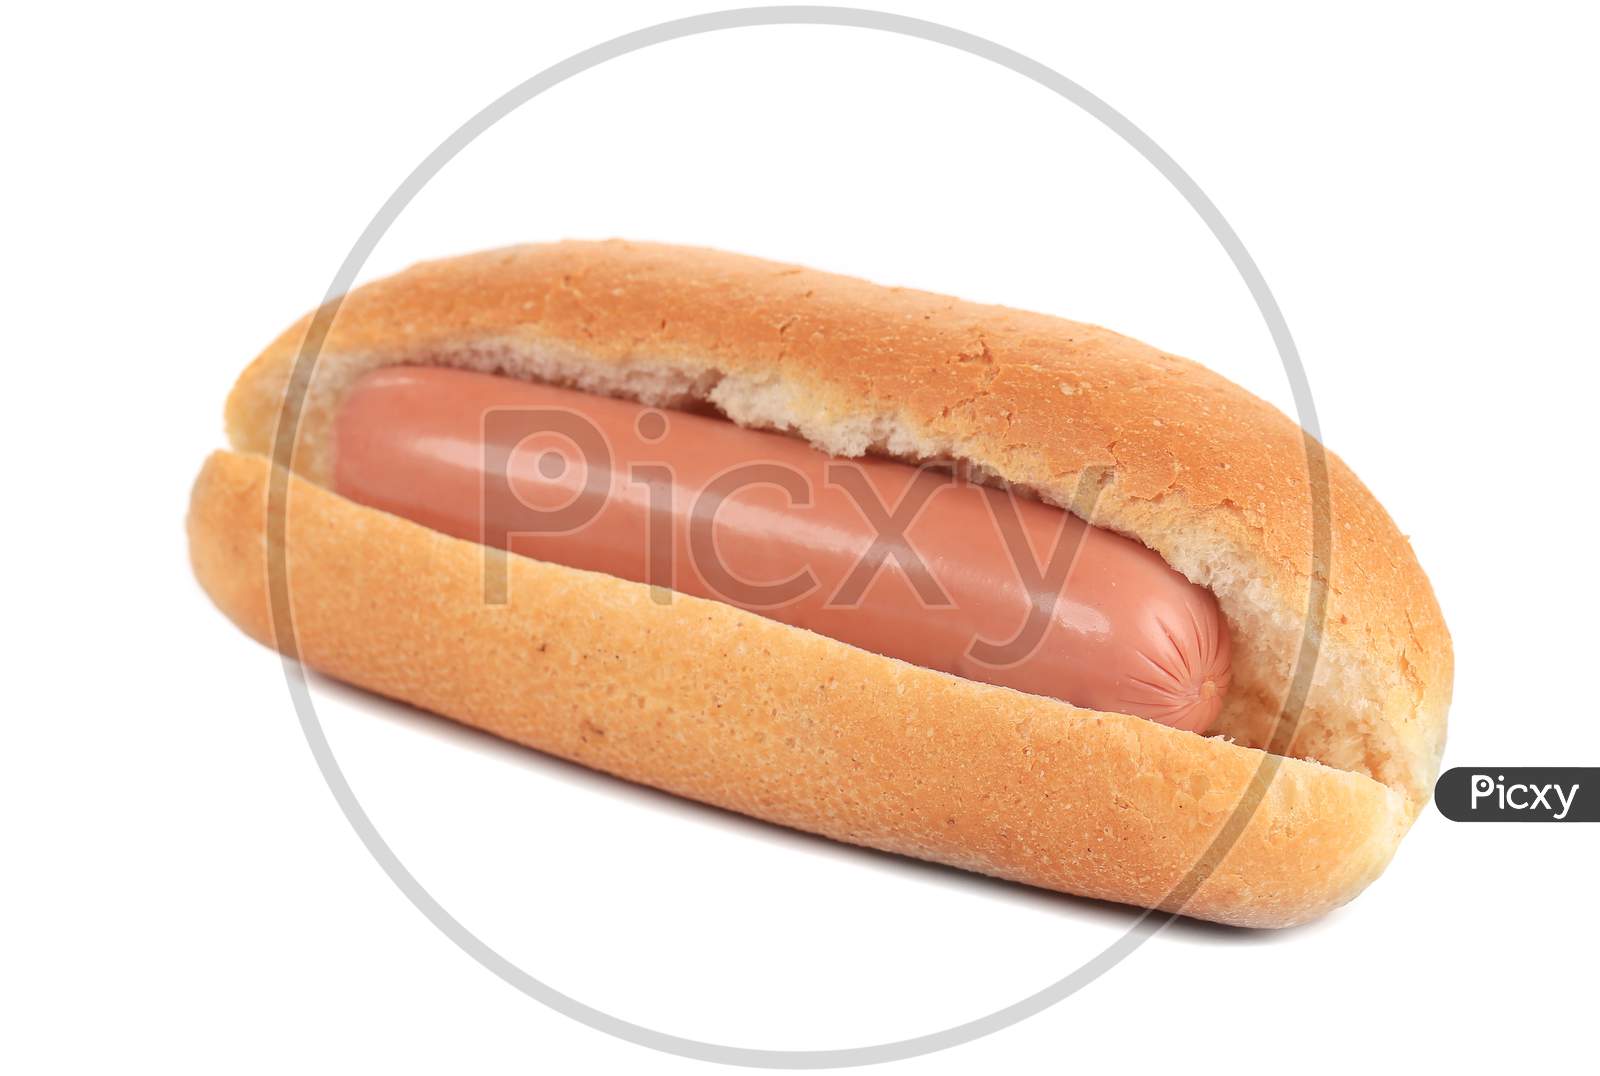 Hot Dog Bread And Sausage Roll. Isolated On A White Background.